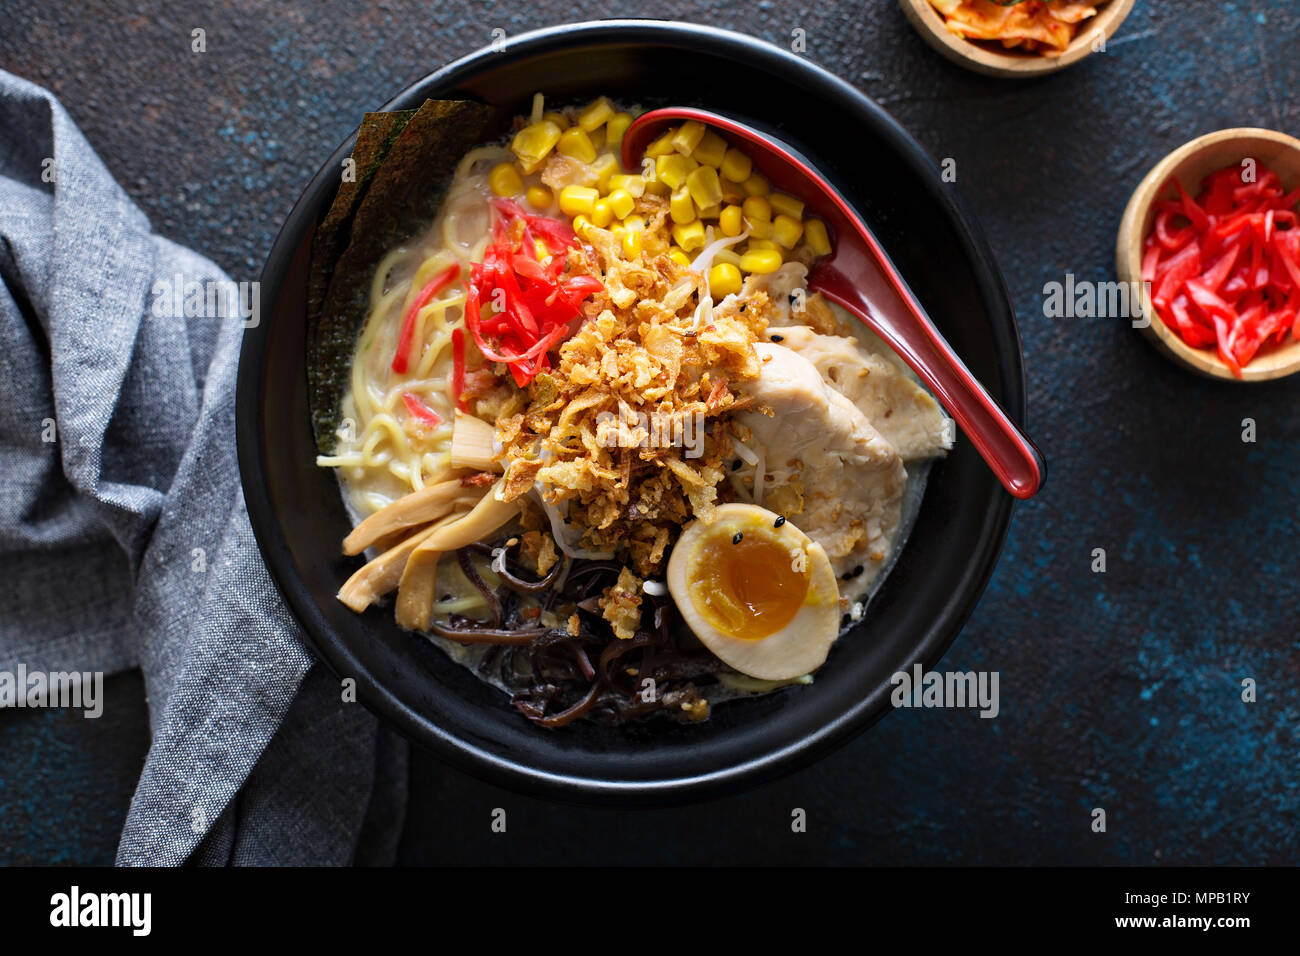 Spicy ramen bowl with noodles and chicken Stock Photo